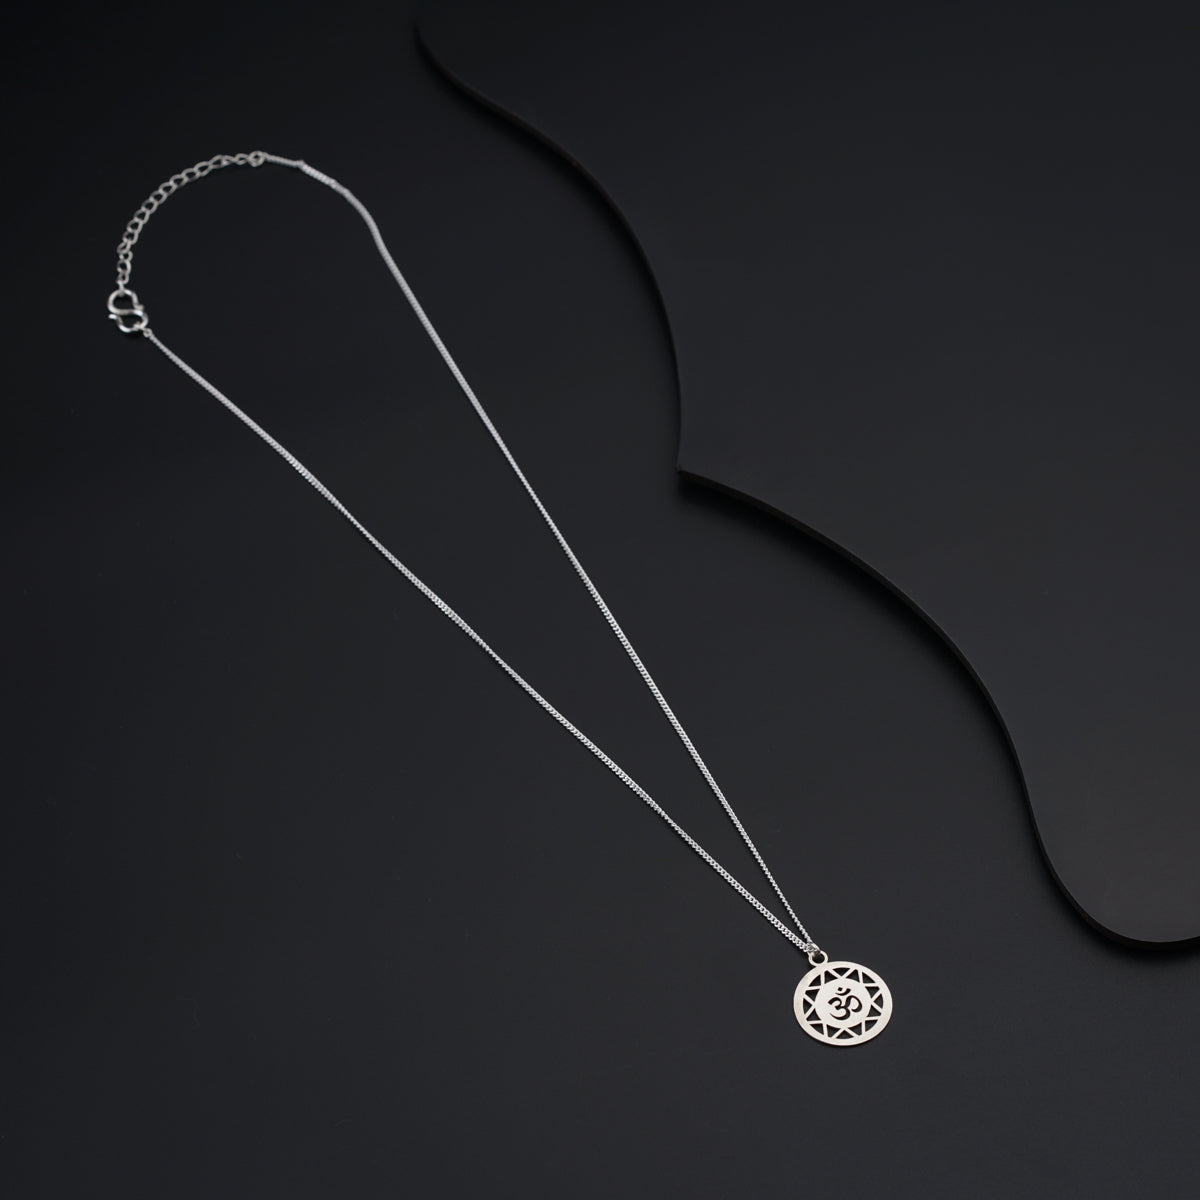 a necklace with a circular pendant on a black background